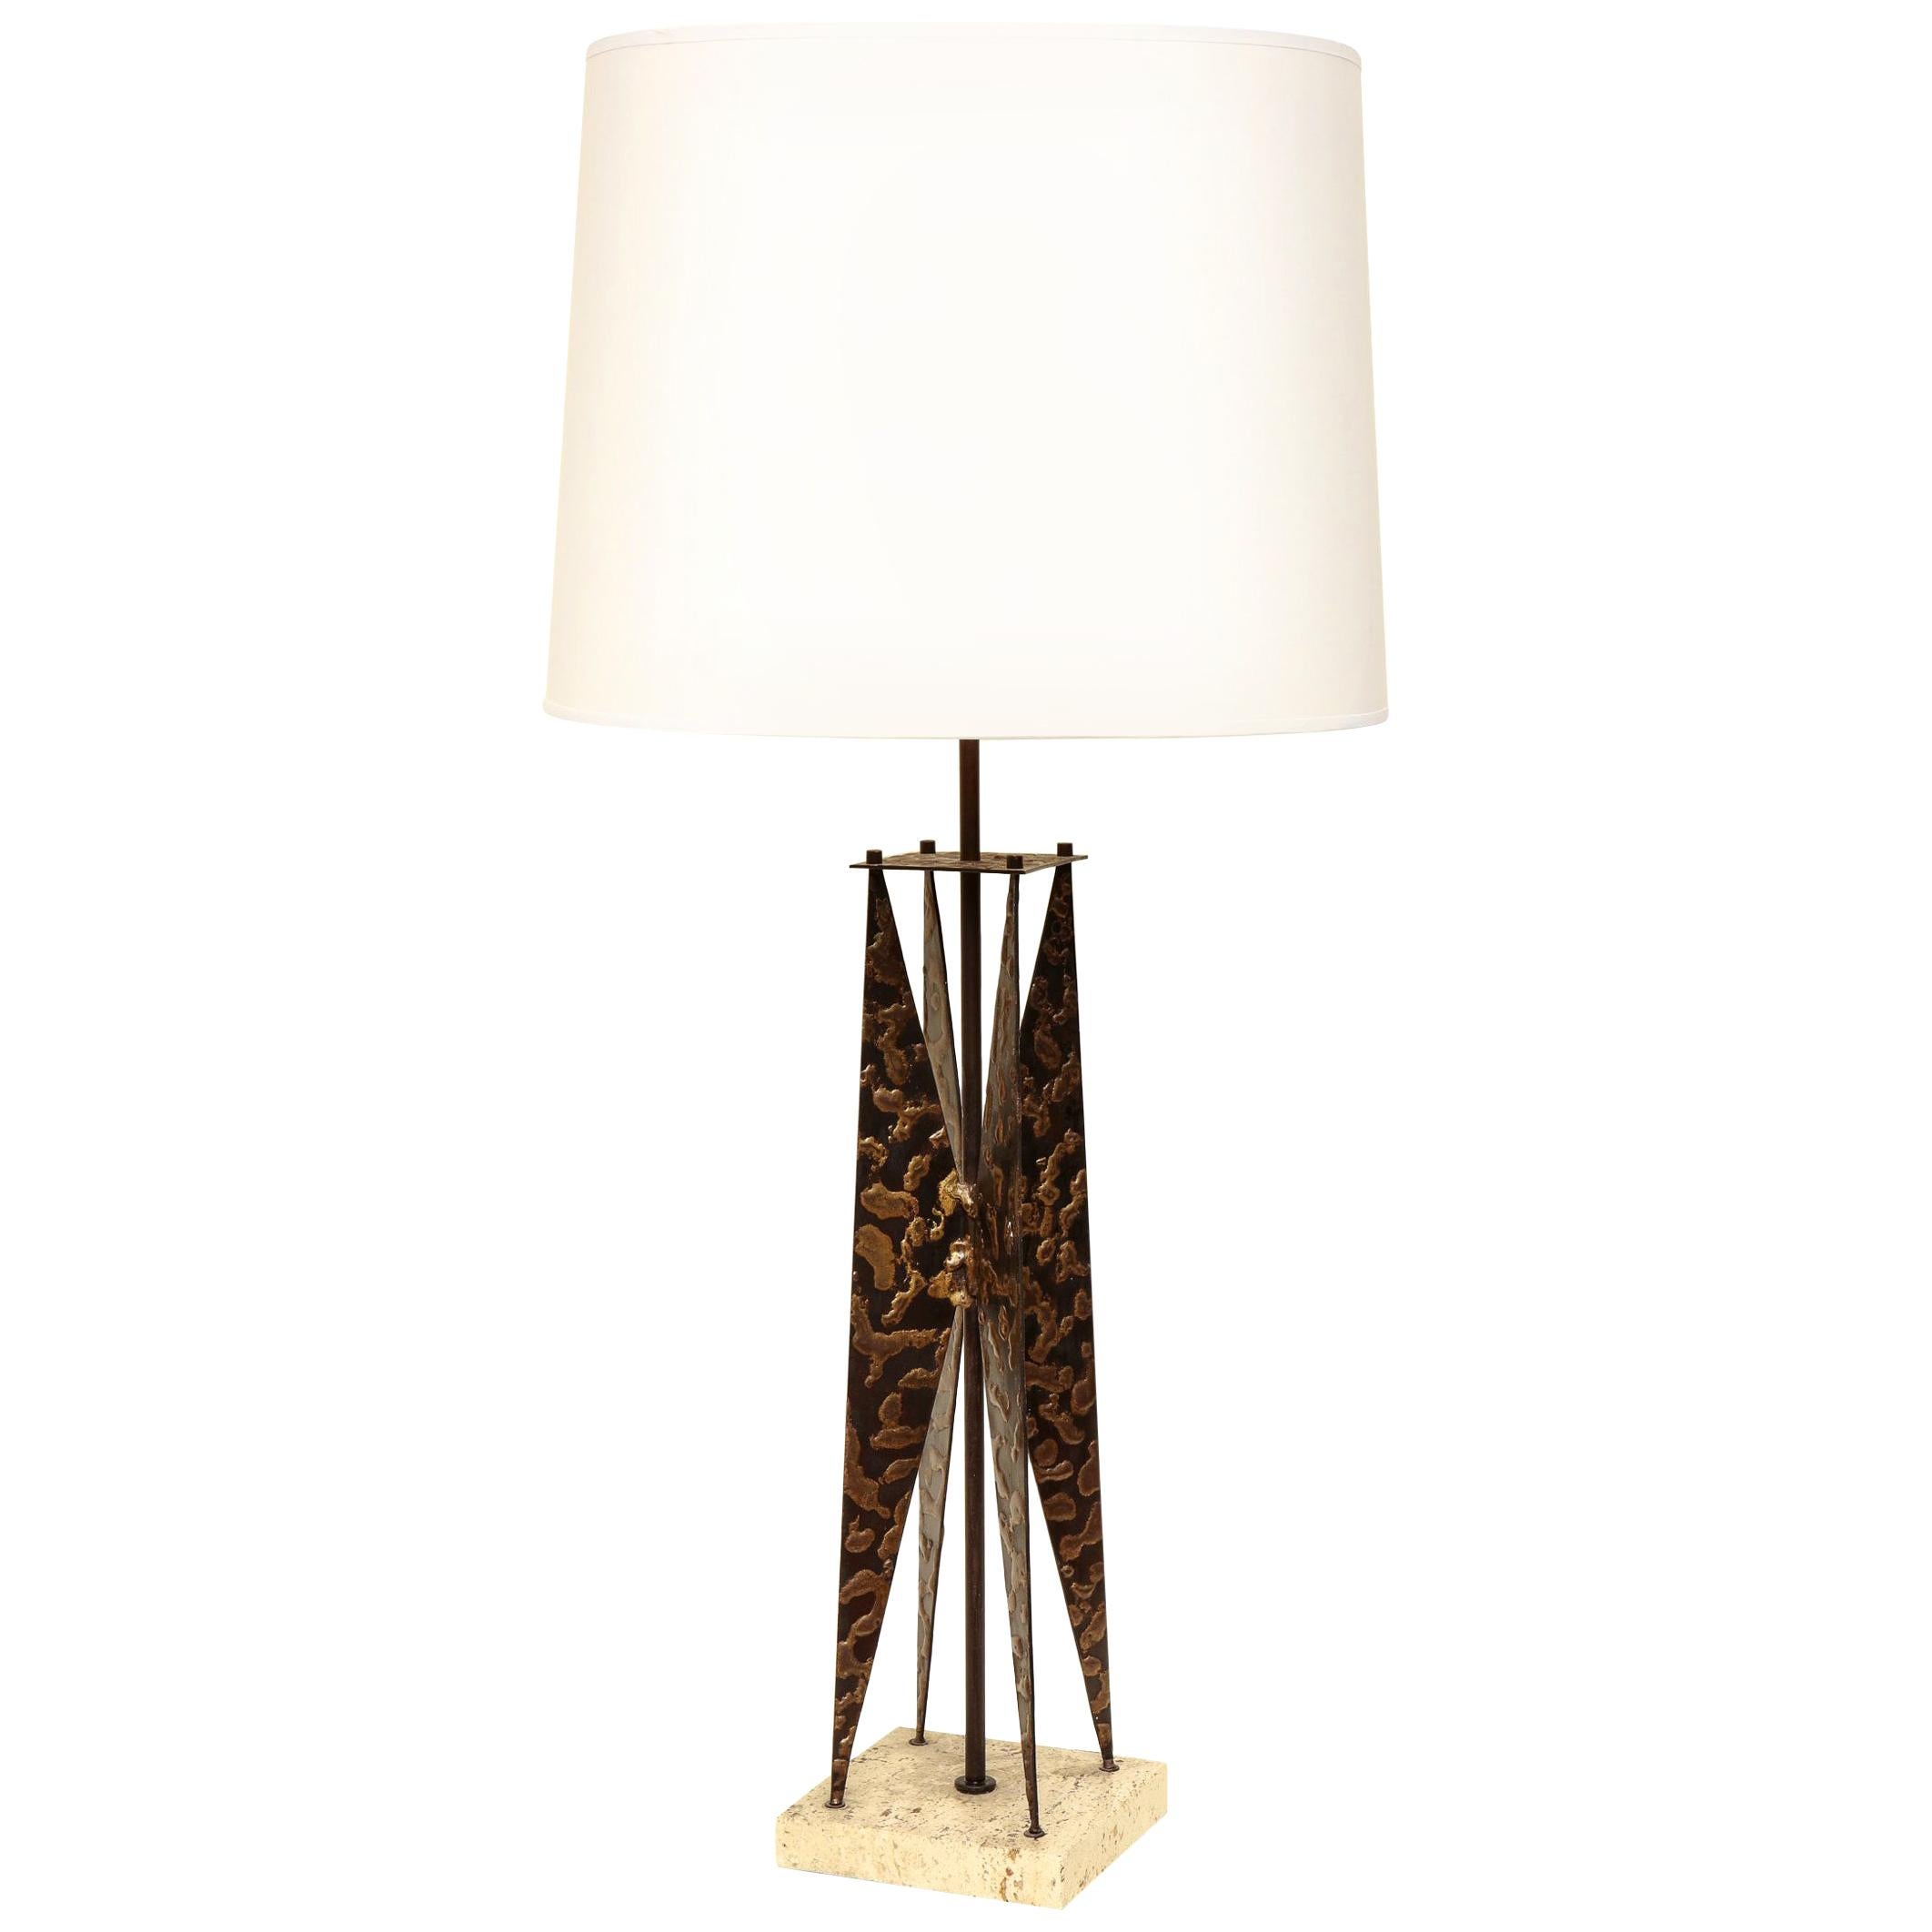 Fantoni Table Lamp Mid-Century Modern Sculptural Form Crafted of Patinated Iron For Sale